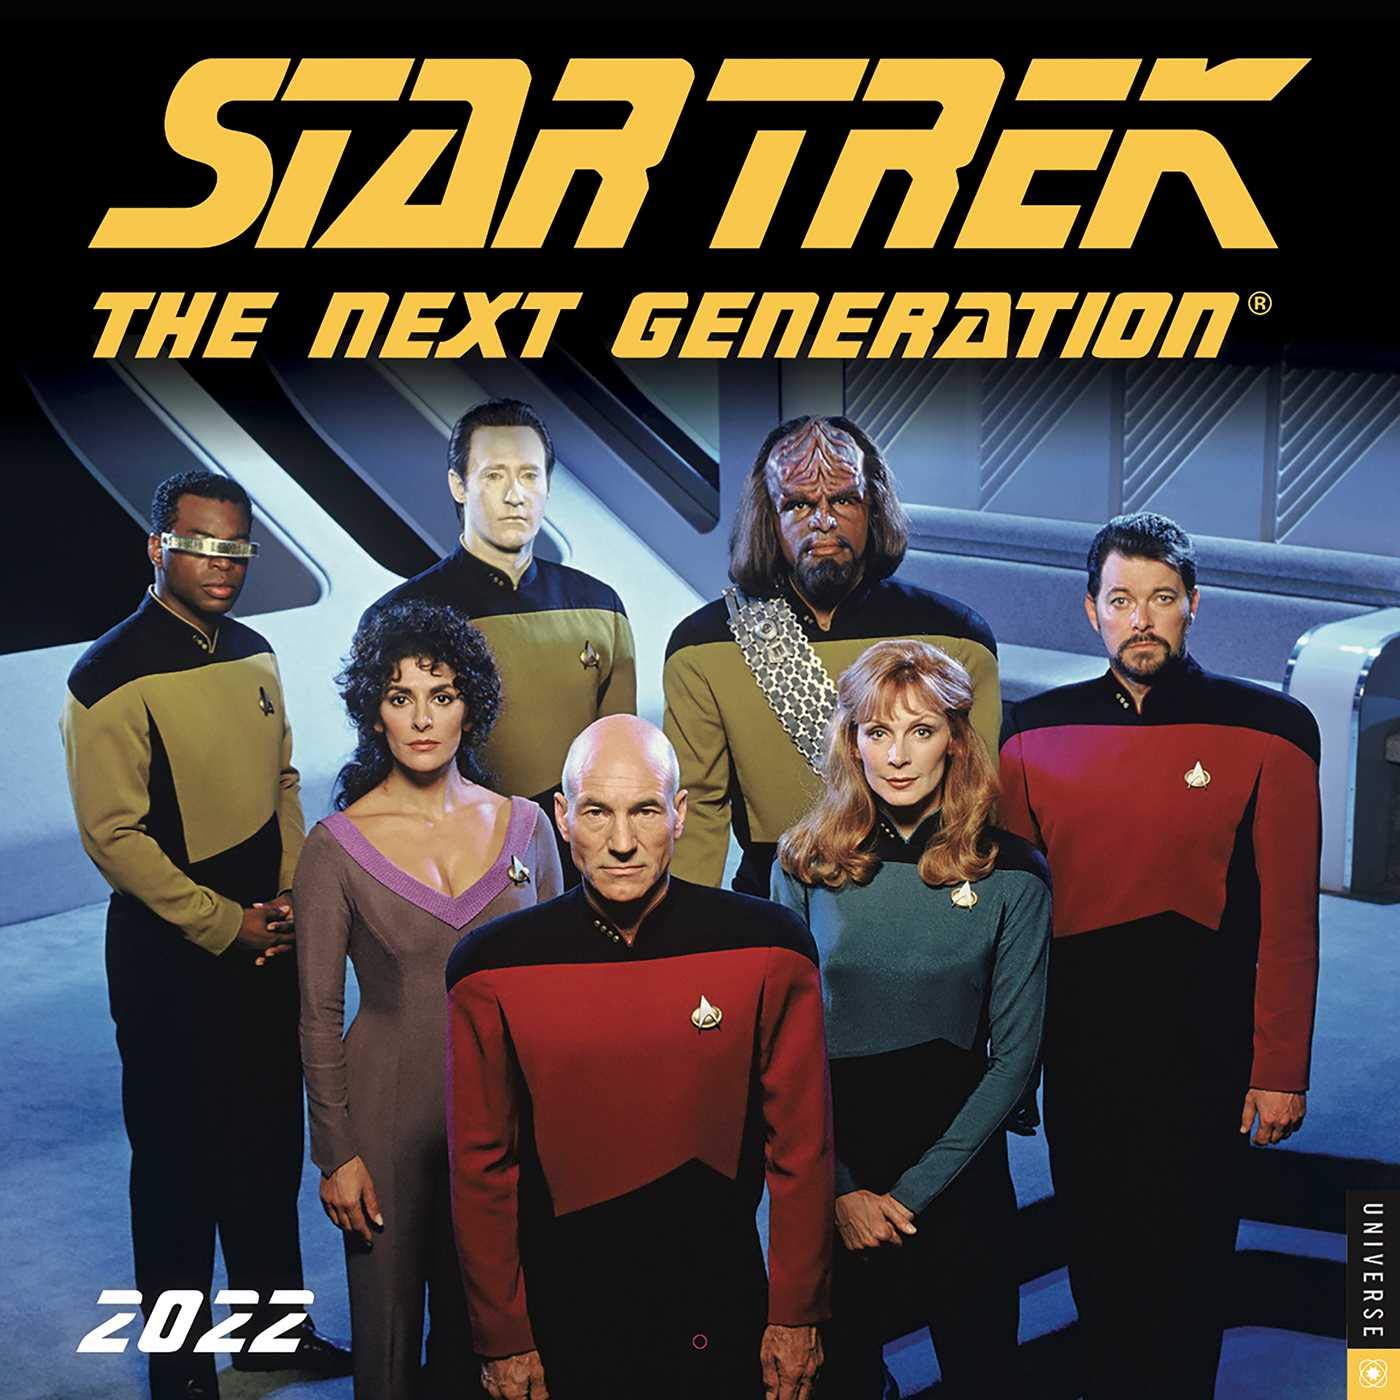 The Trek Collective: New back-cover previews for the 2022 Star Trek ...